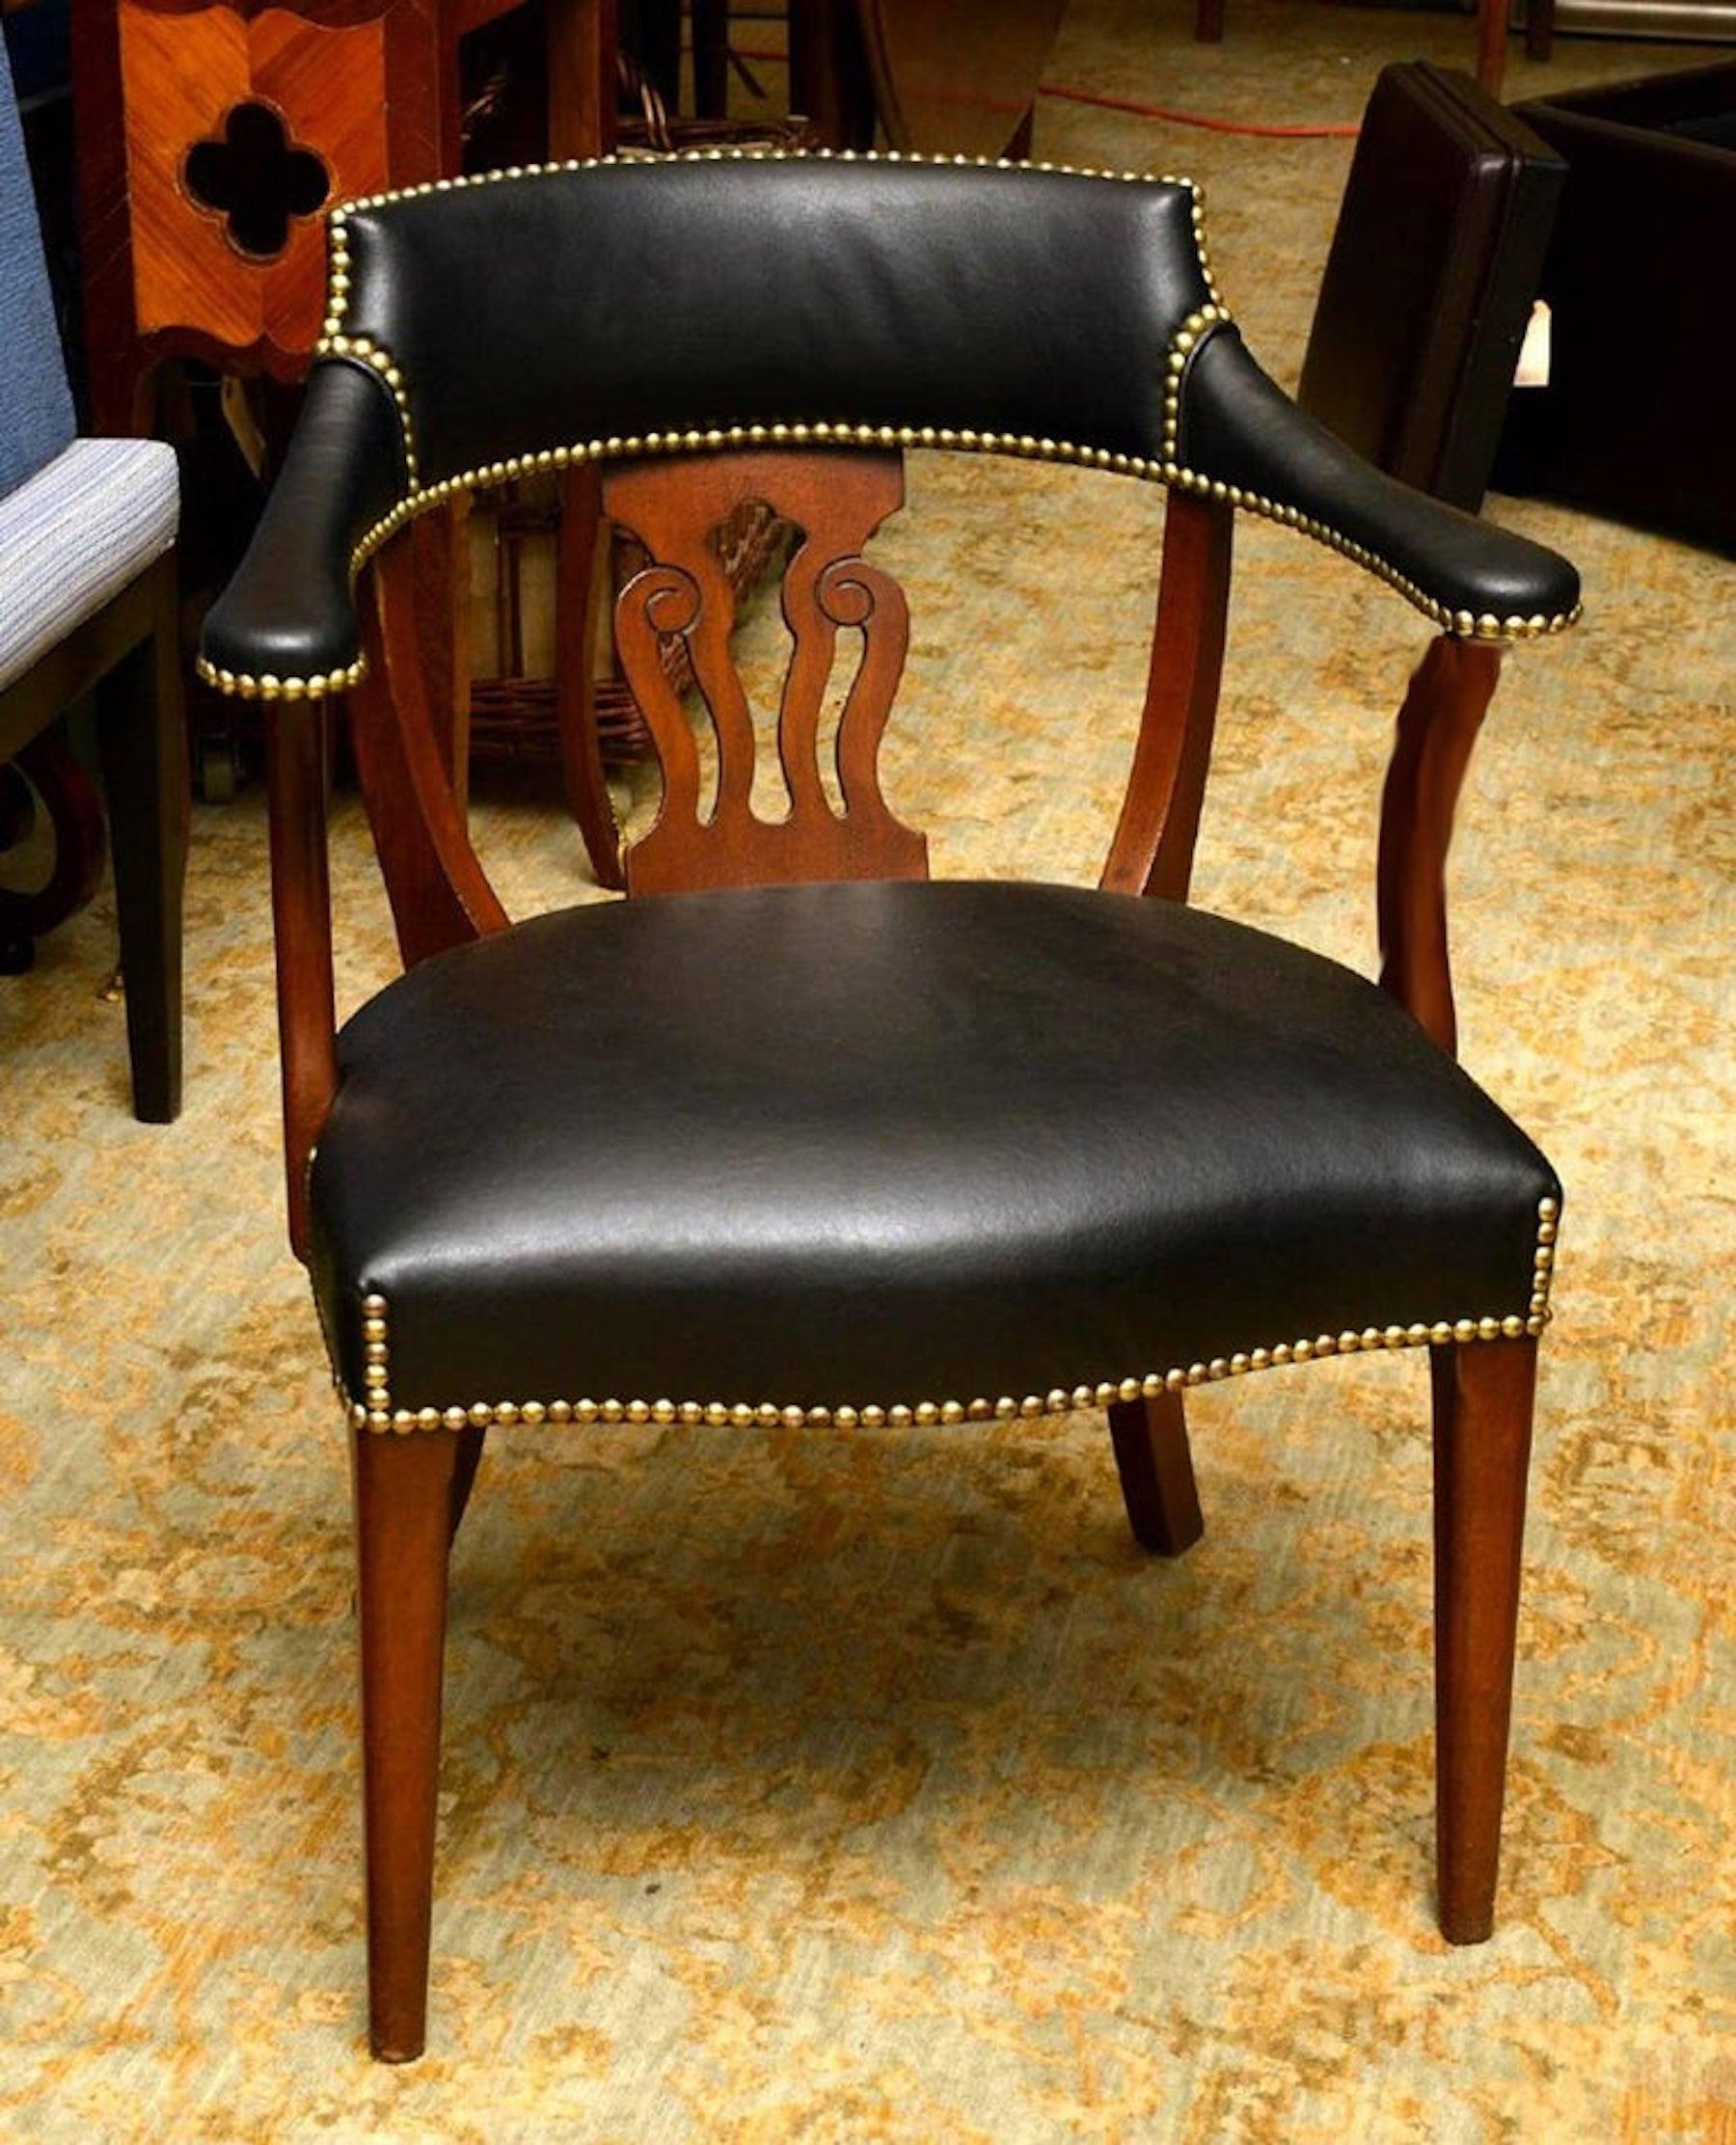 Modern English mahogany and leather captains chair, of typical form with subtle details, custom calfskin leather upholstery.
Provenance: Acquired from Jacques Grange.